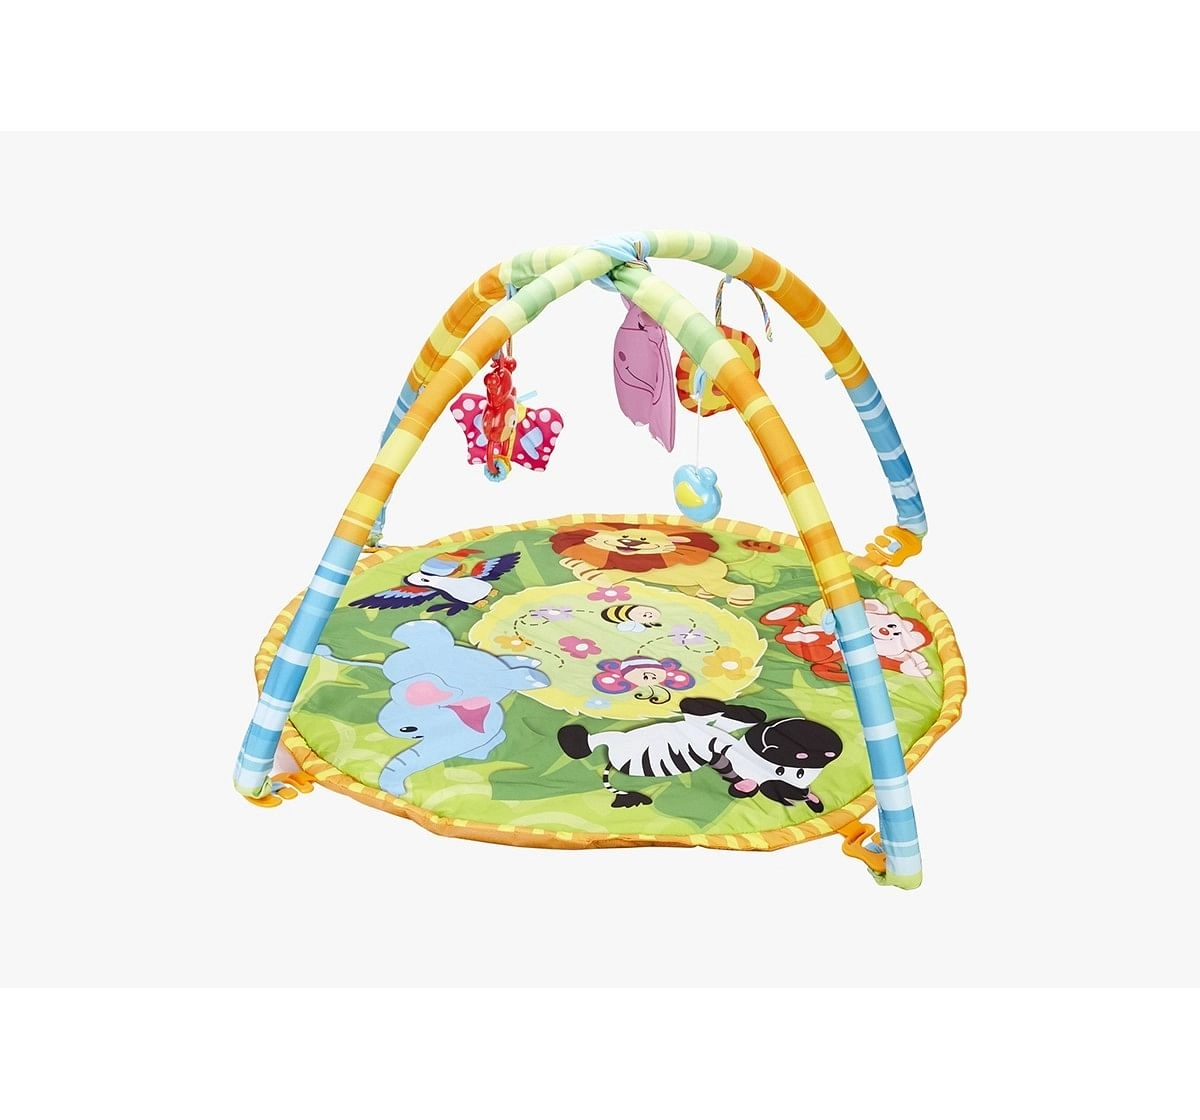 Winfun Jungle Pals Playmat Baby Gear for Kids age 0M+ 